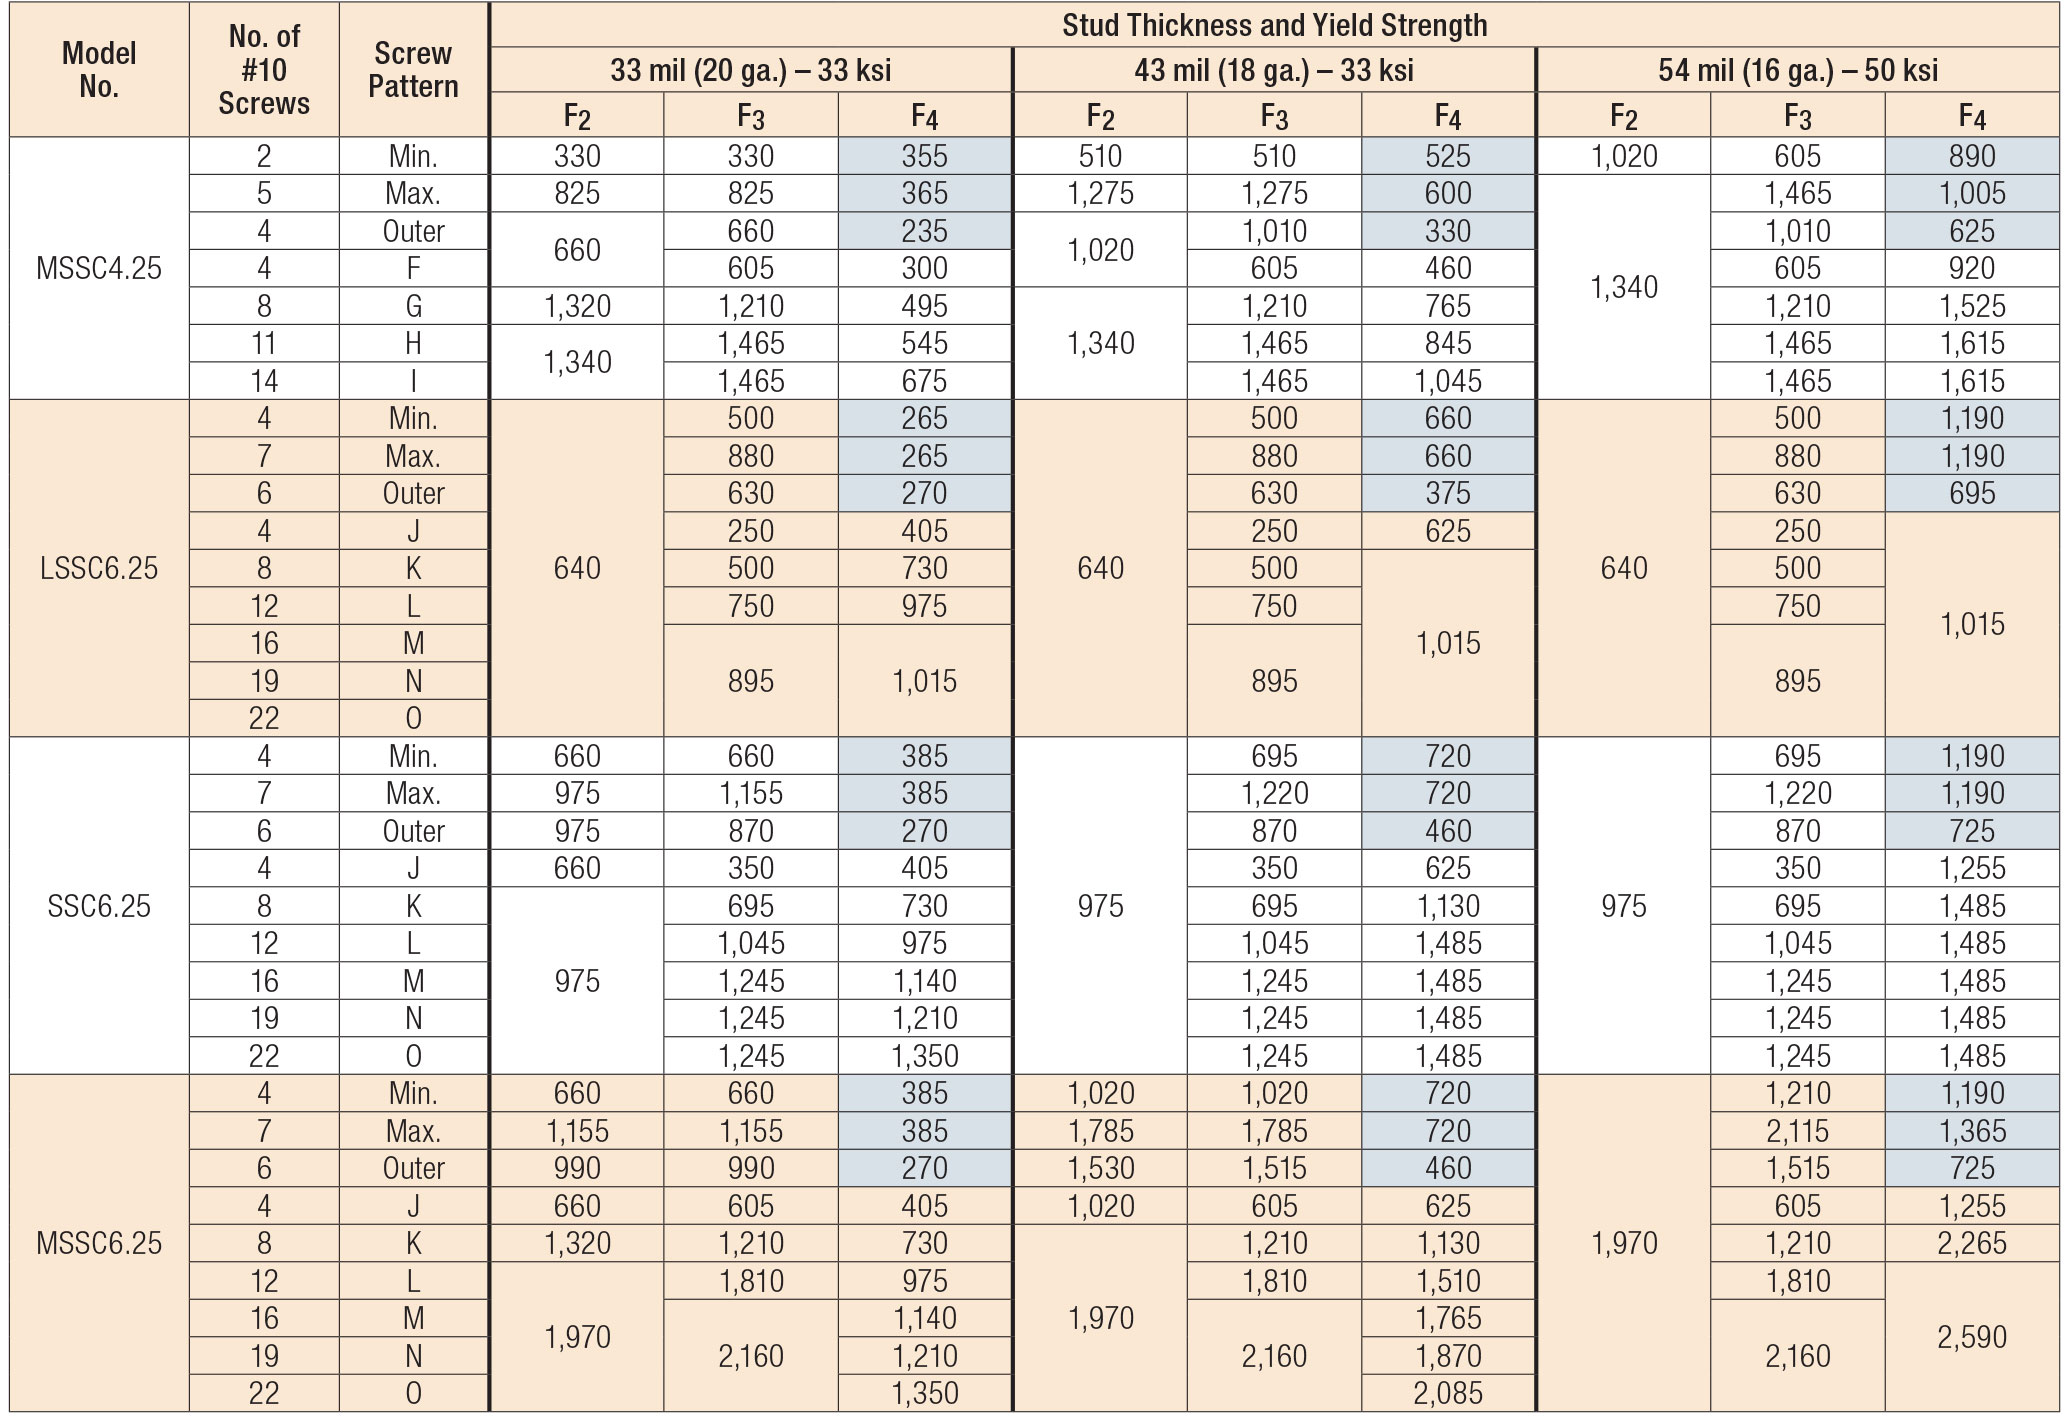 Load Table - SSC Steel Stud Connectors (SSC2.25 and MSSC2.25) - Service Load Limits and Strengths (lb.)